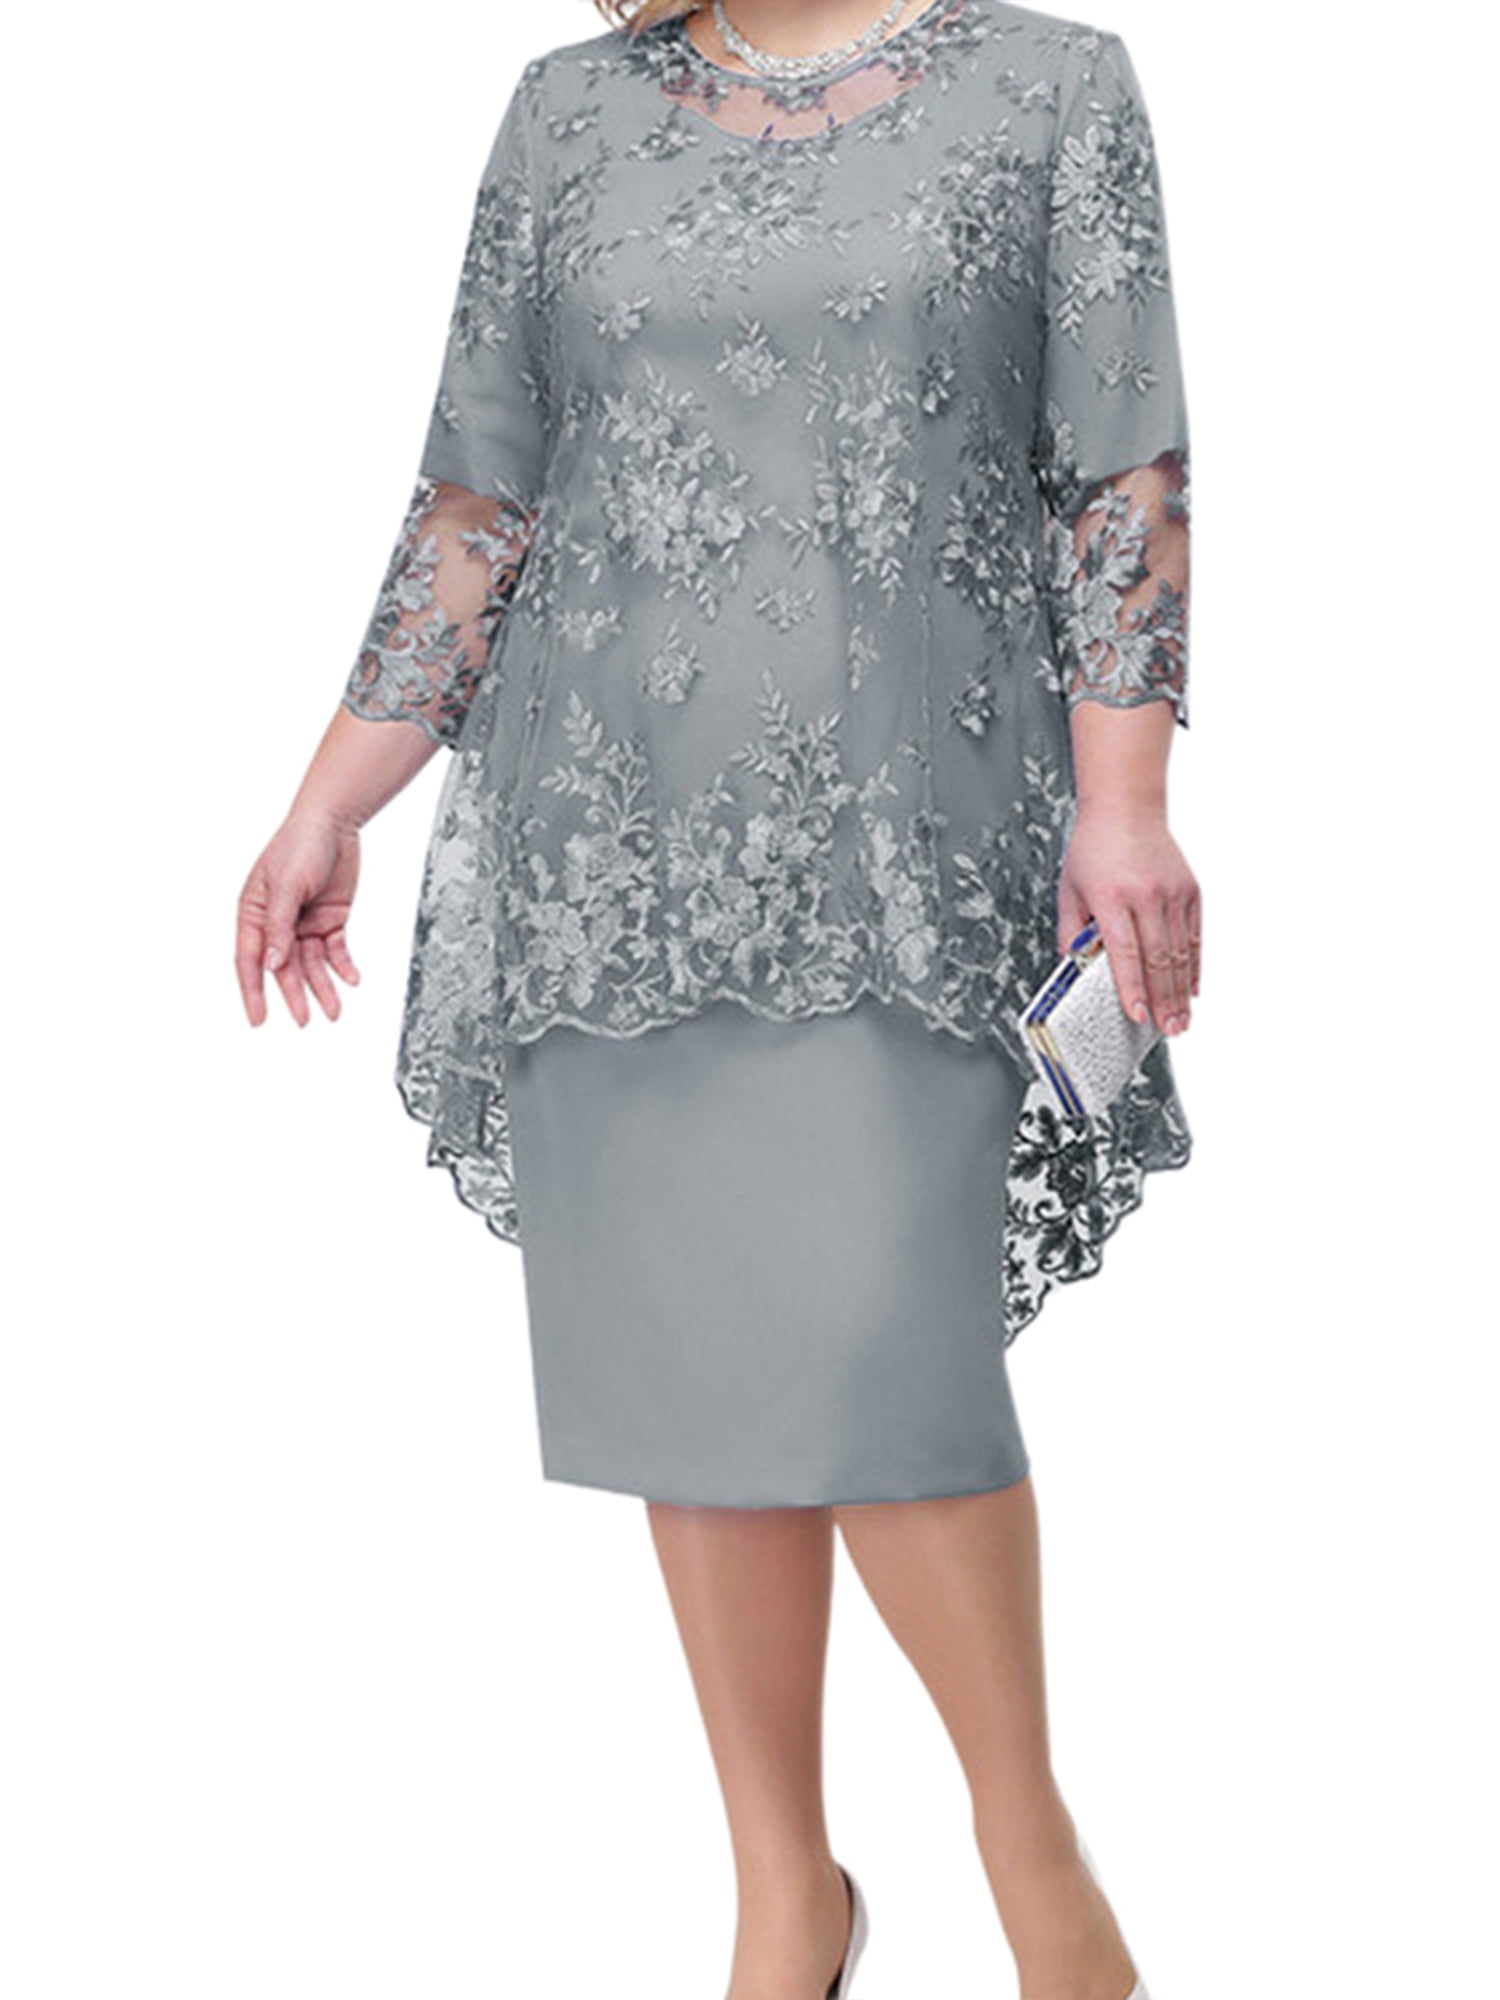 LilyLLL Plus Size L-8XL Womens Elegant Lace Sheer Evening Party Office ...